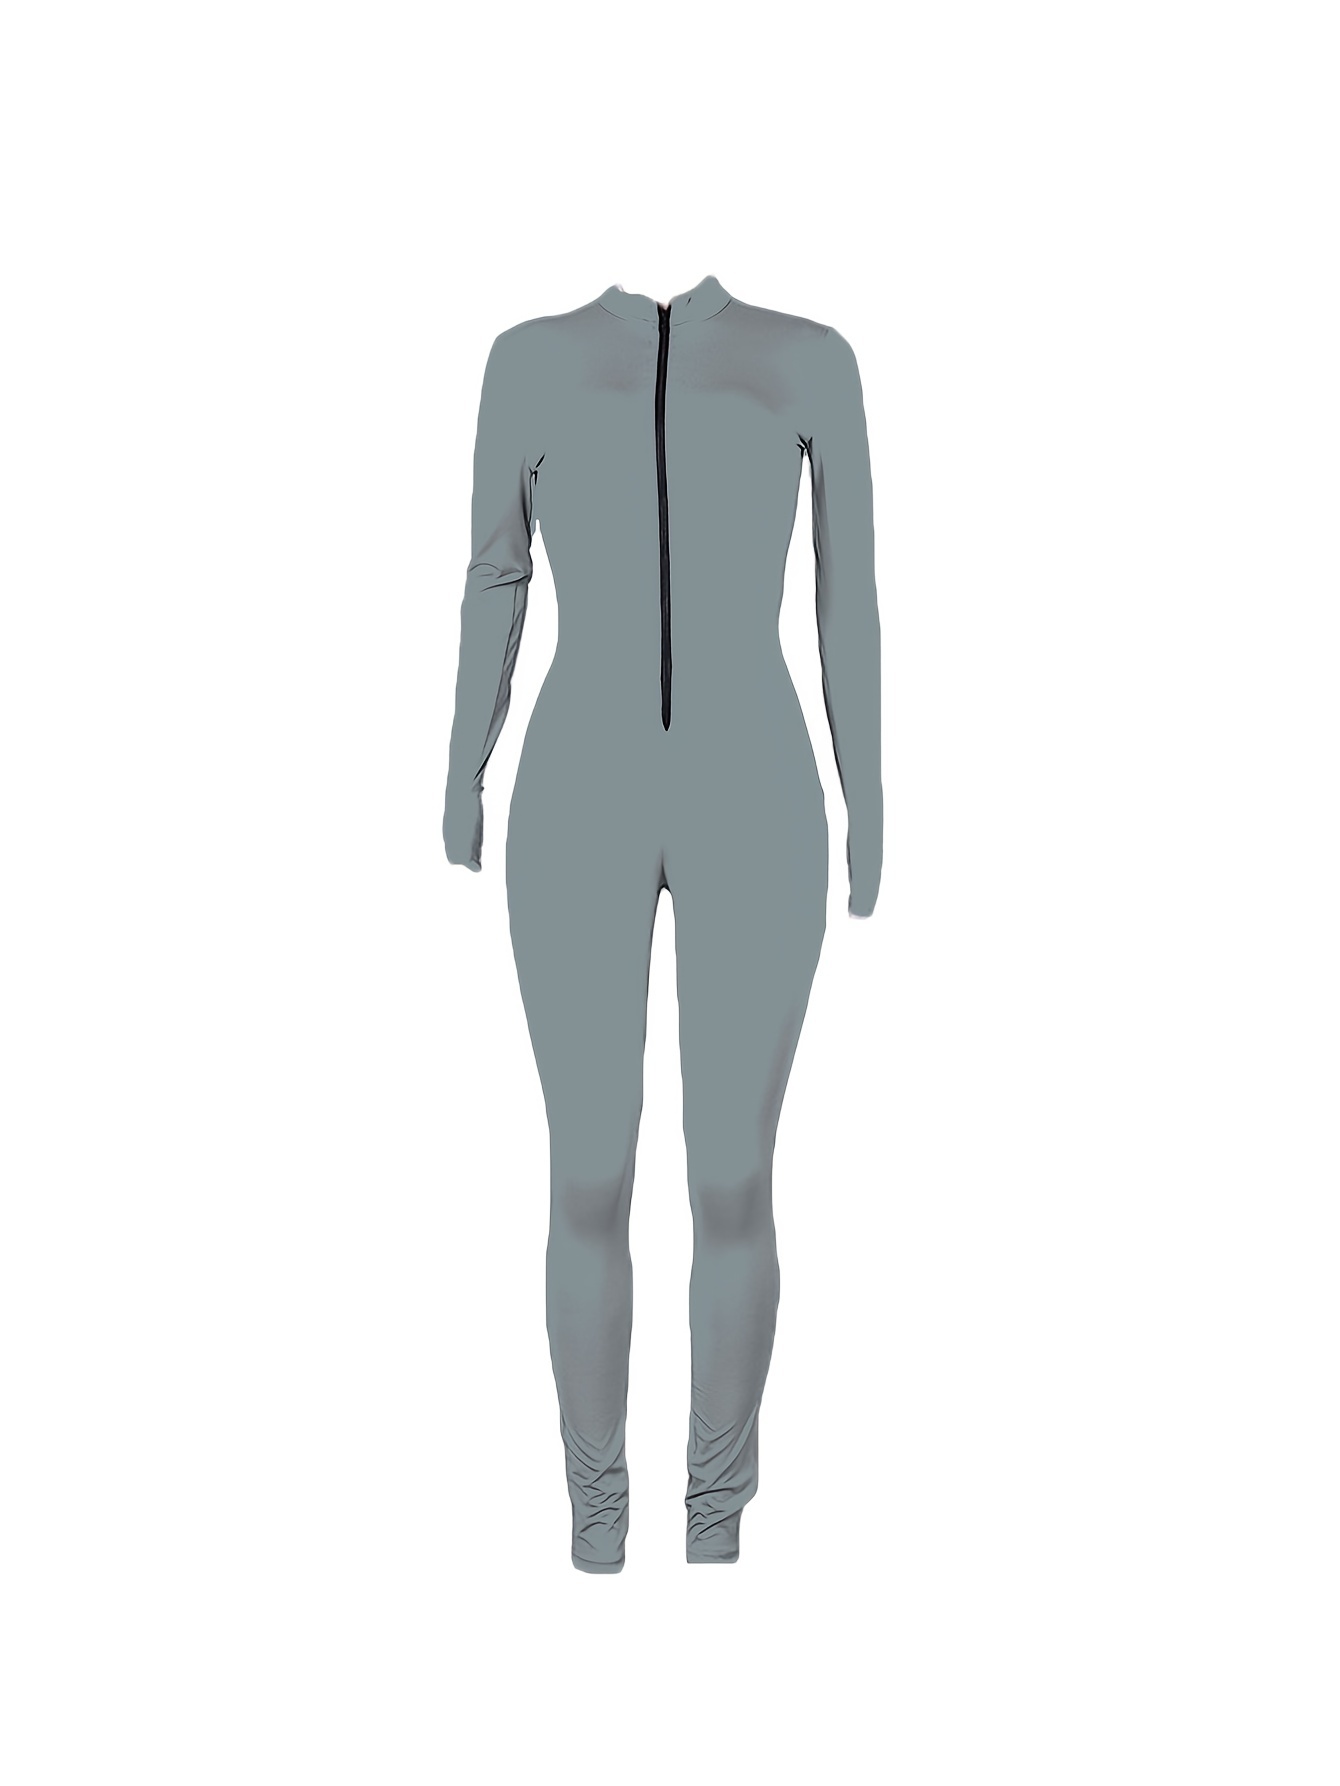 adviicd Cotton Jumpsuits For Women Women's Long Sleeve Bodycon